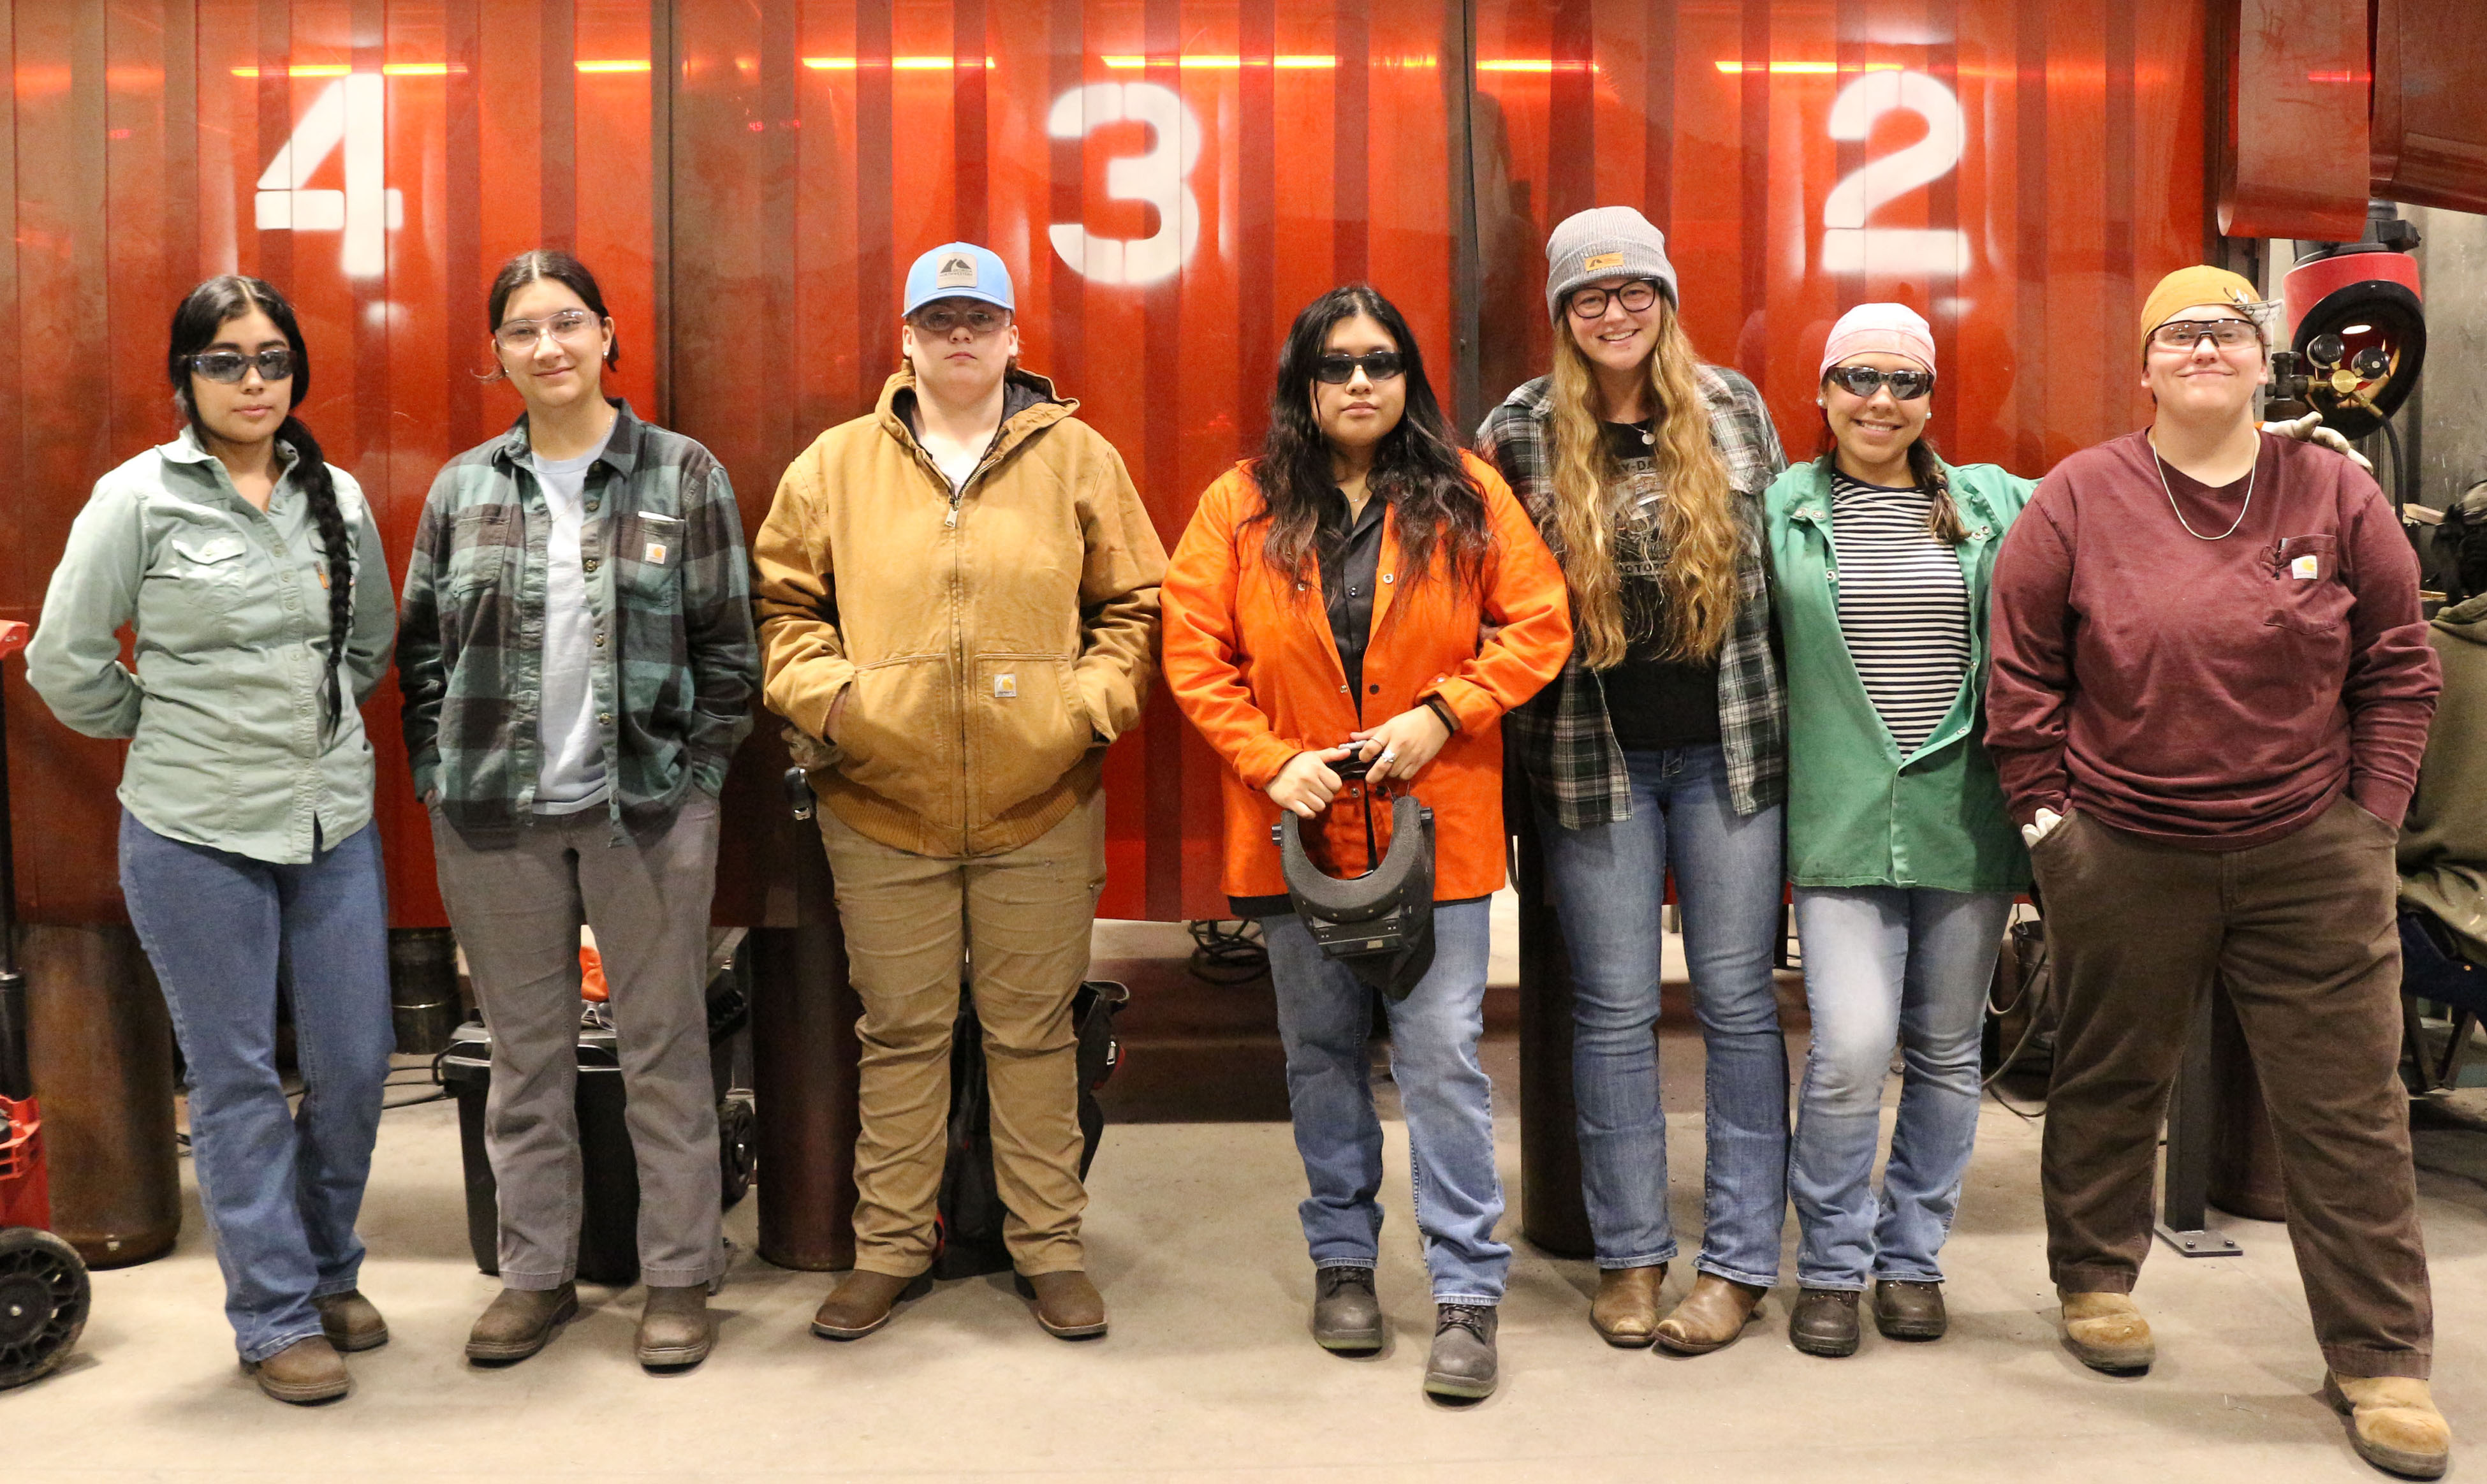 (From left) Arianna Rodriguez, Yosdel Castaneda, Kelsey Martin, Heidi Martinez, Molly Satterfield, Armida Vicente and Sophia Shepherd are welding students at GNTC’s Whitfield Murray Campus in Dalton.